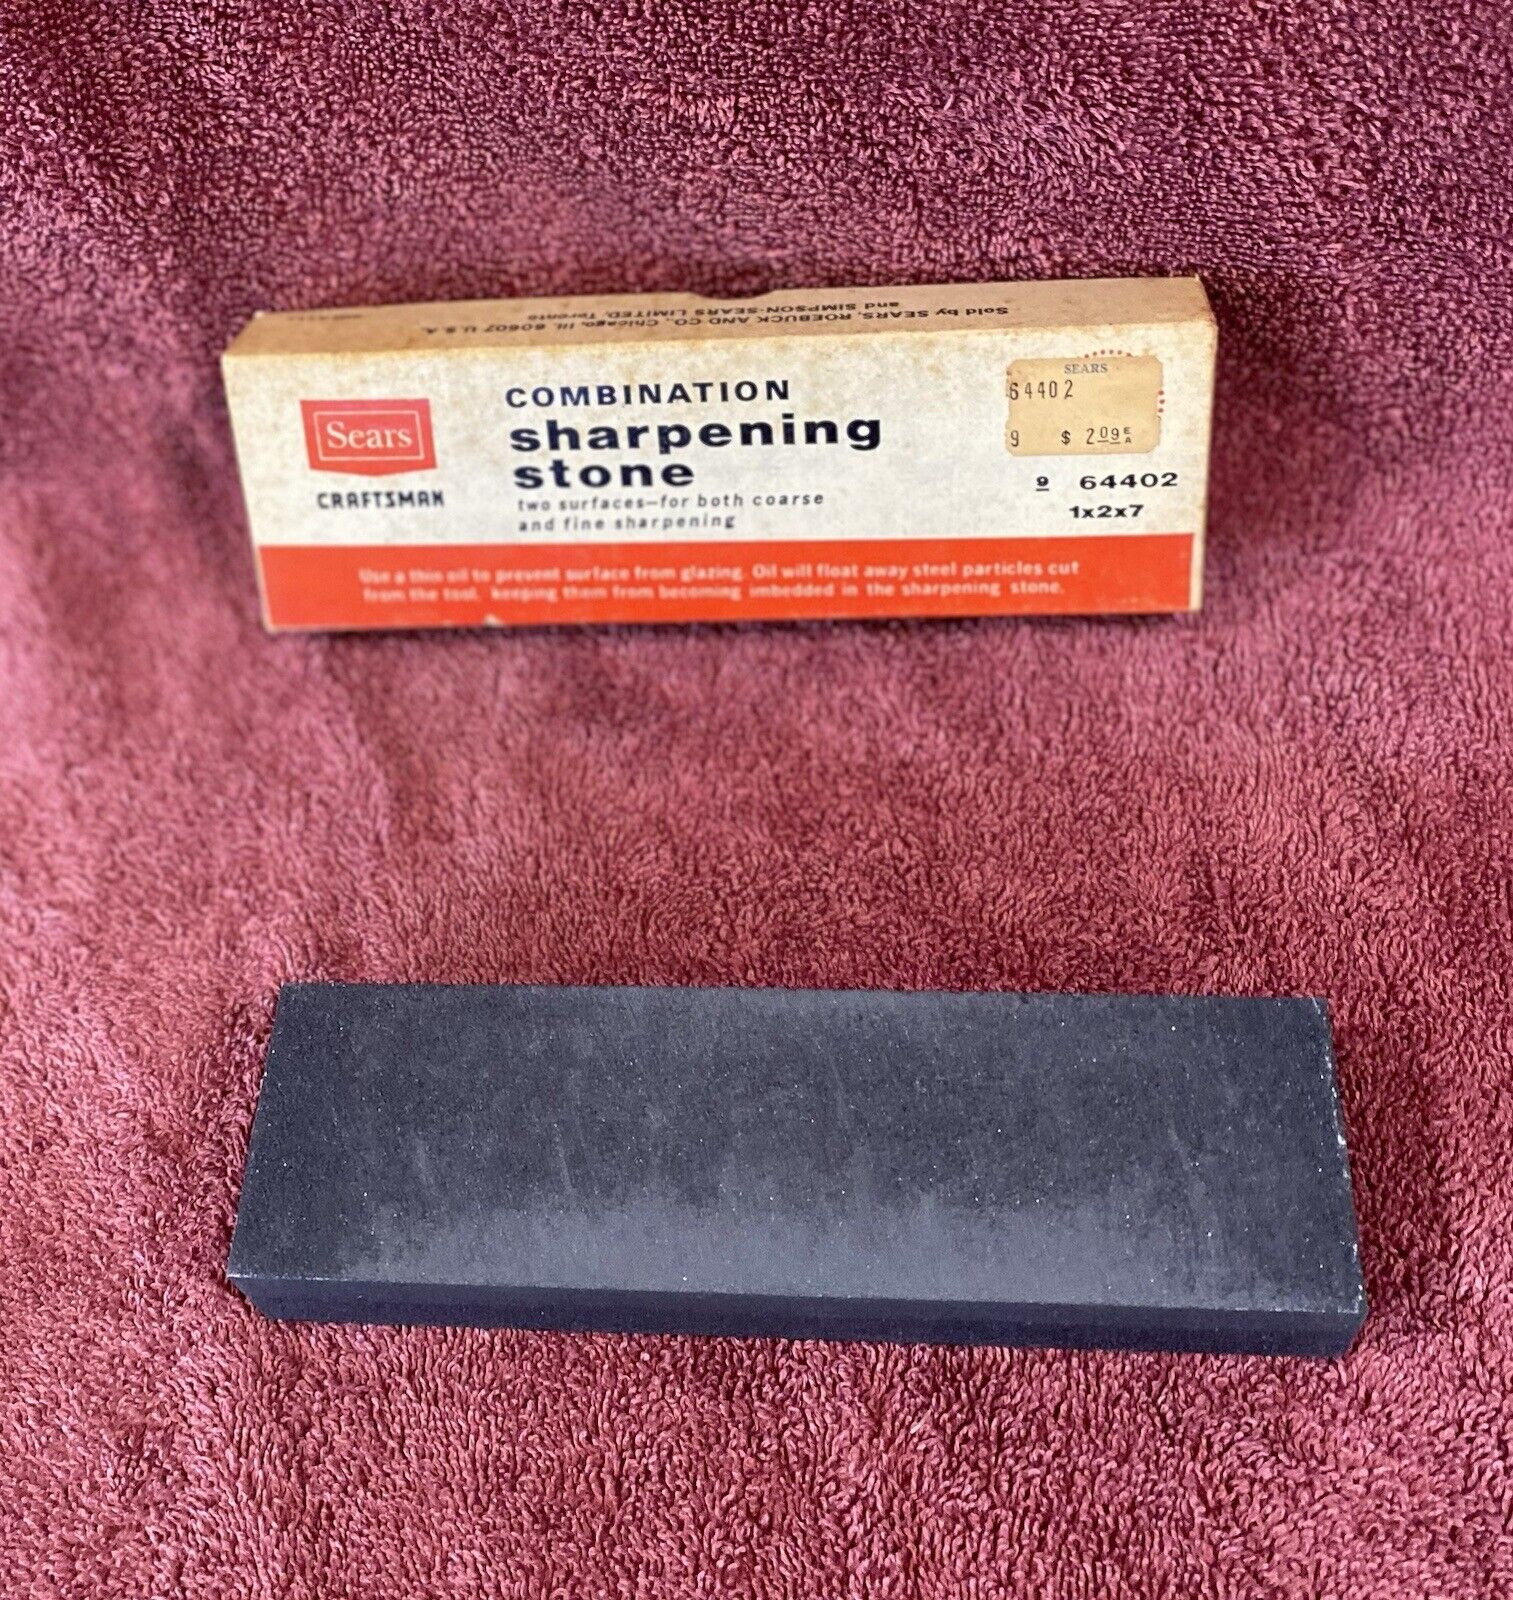 New Old Stock VGT Sears Craftsman Combination Sharpening Stone Double Sided